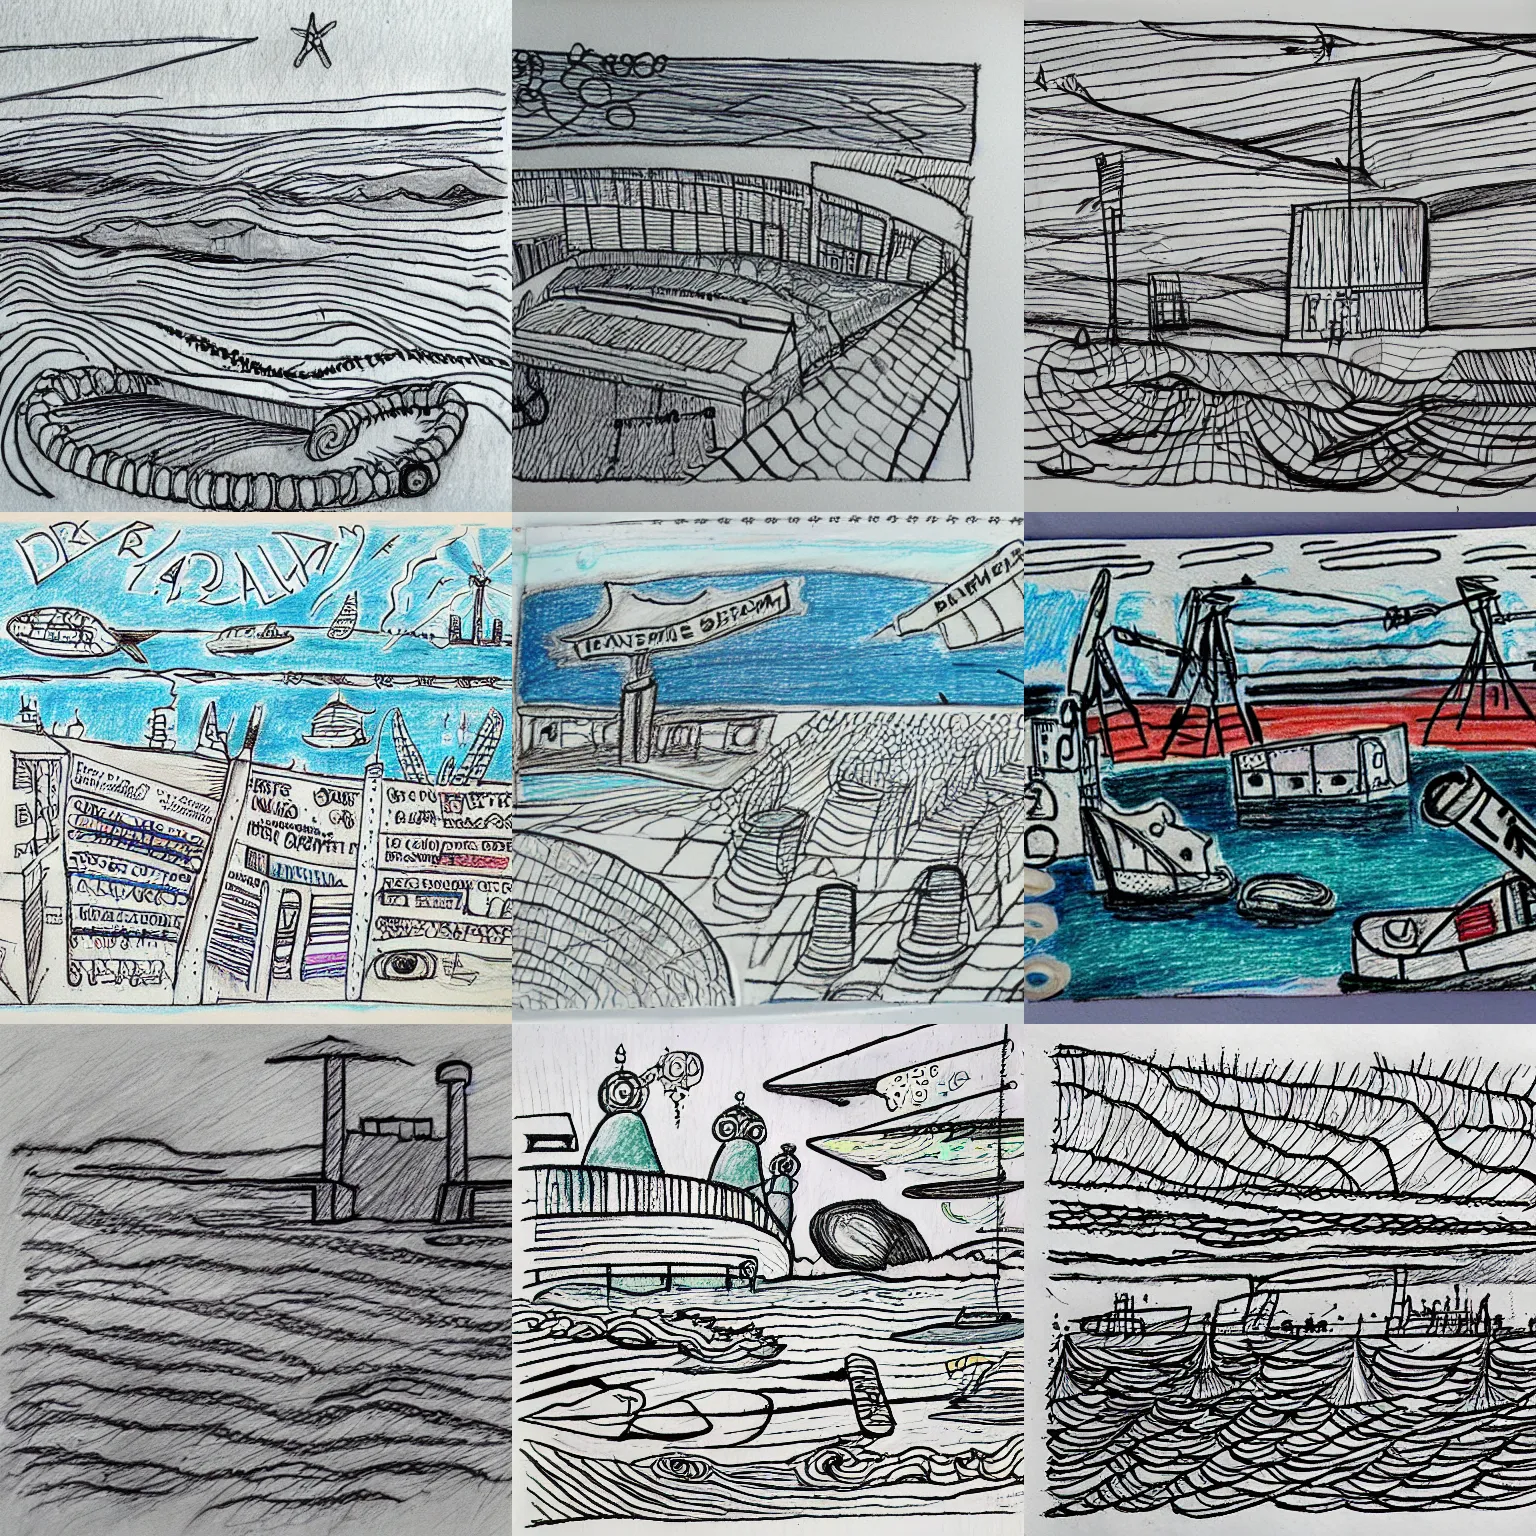 Prompt: dream journal art brut drawing of a fever dream about a sea terminal, found doodled in a sketchbook